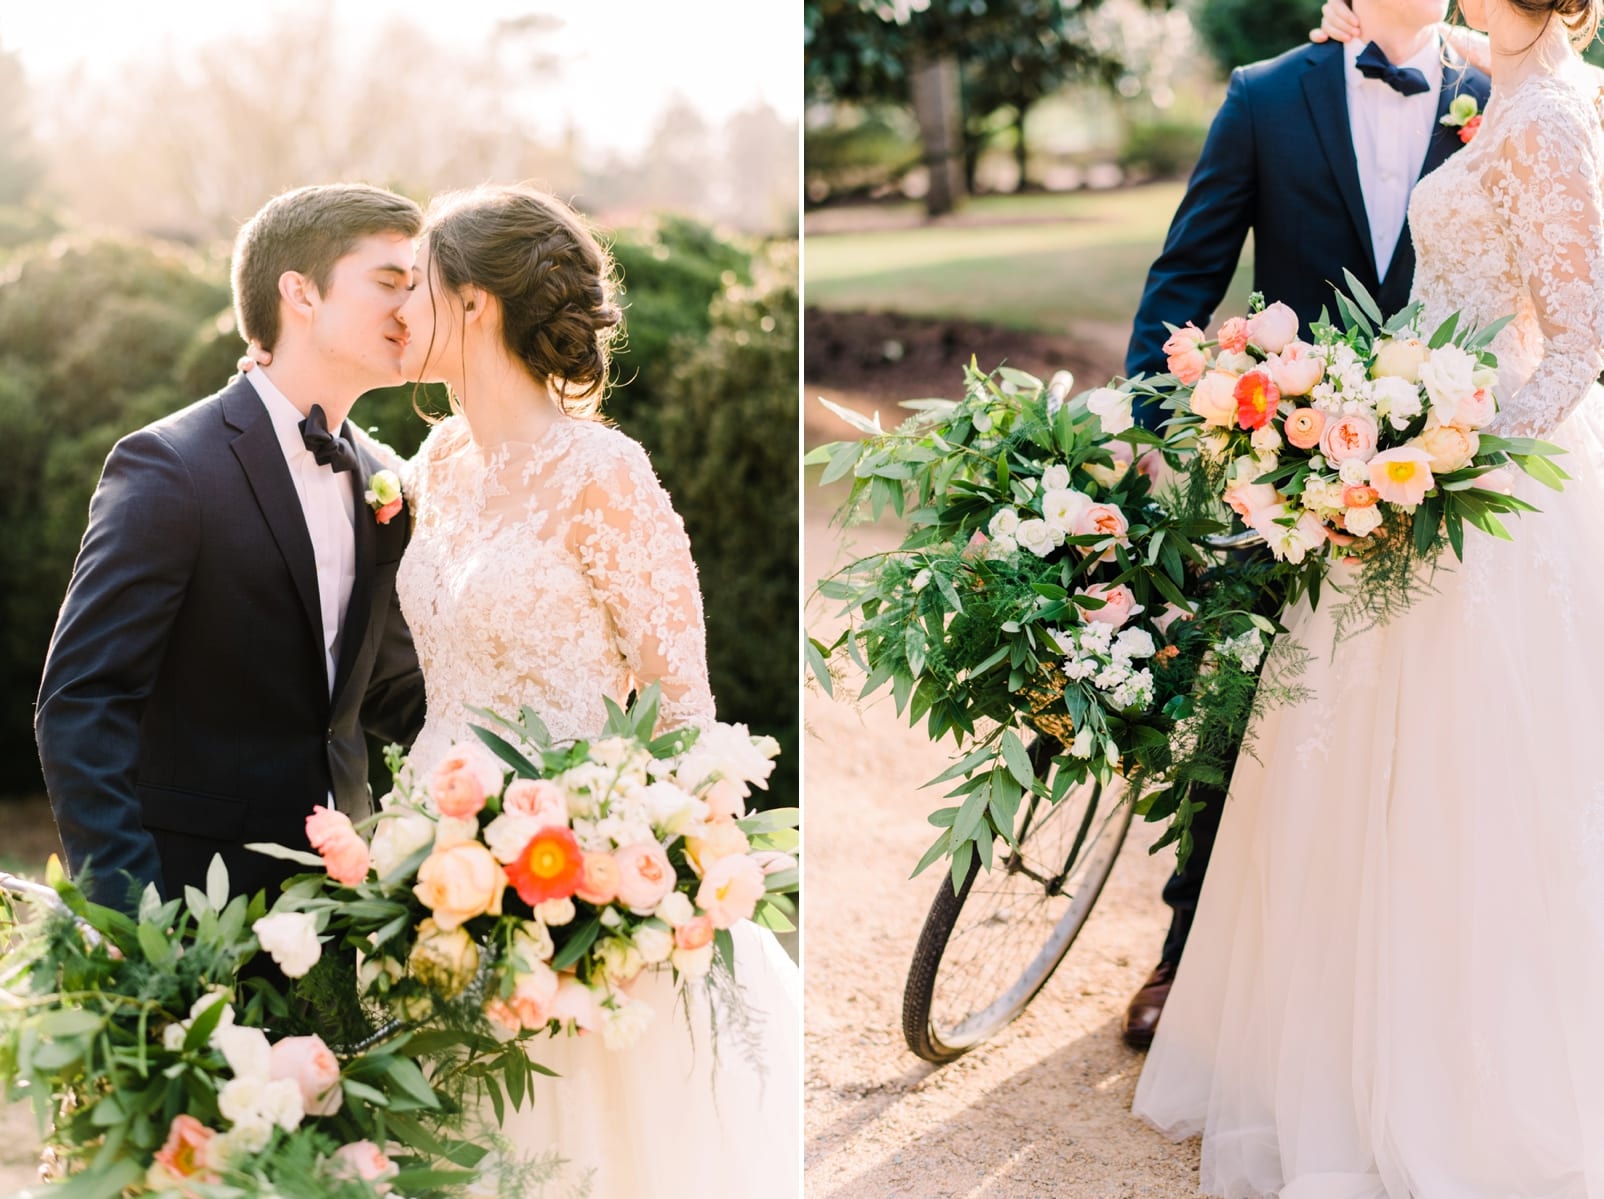 Kast Events & Company cascading bridal bouquet with peach colors and greenery photo